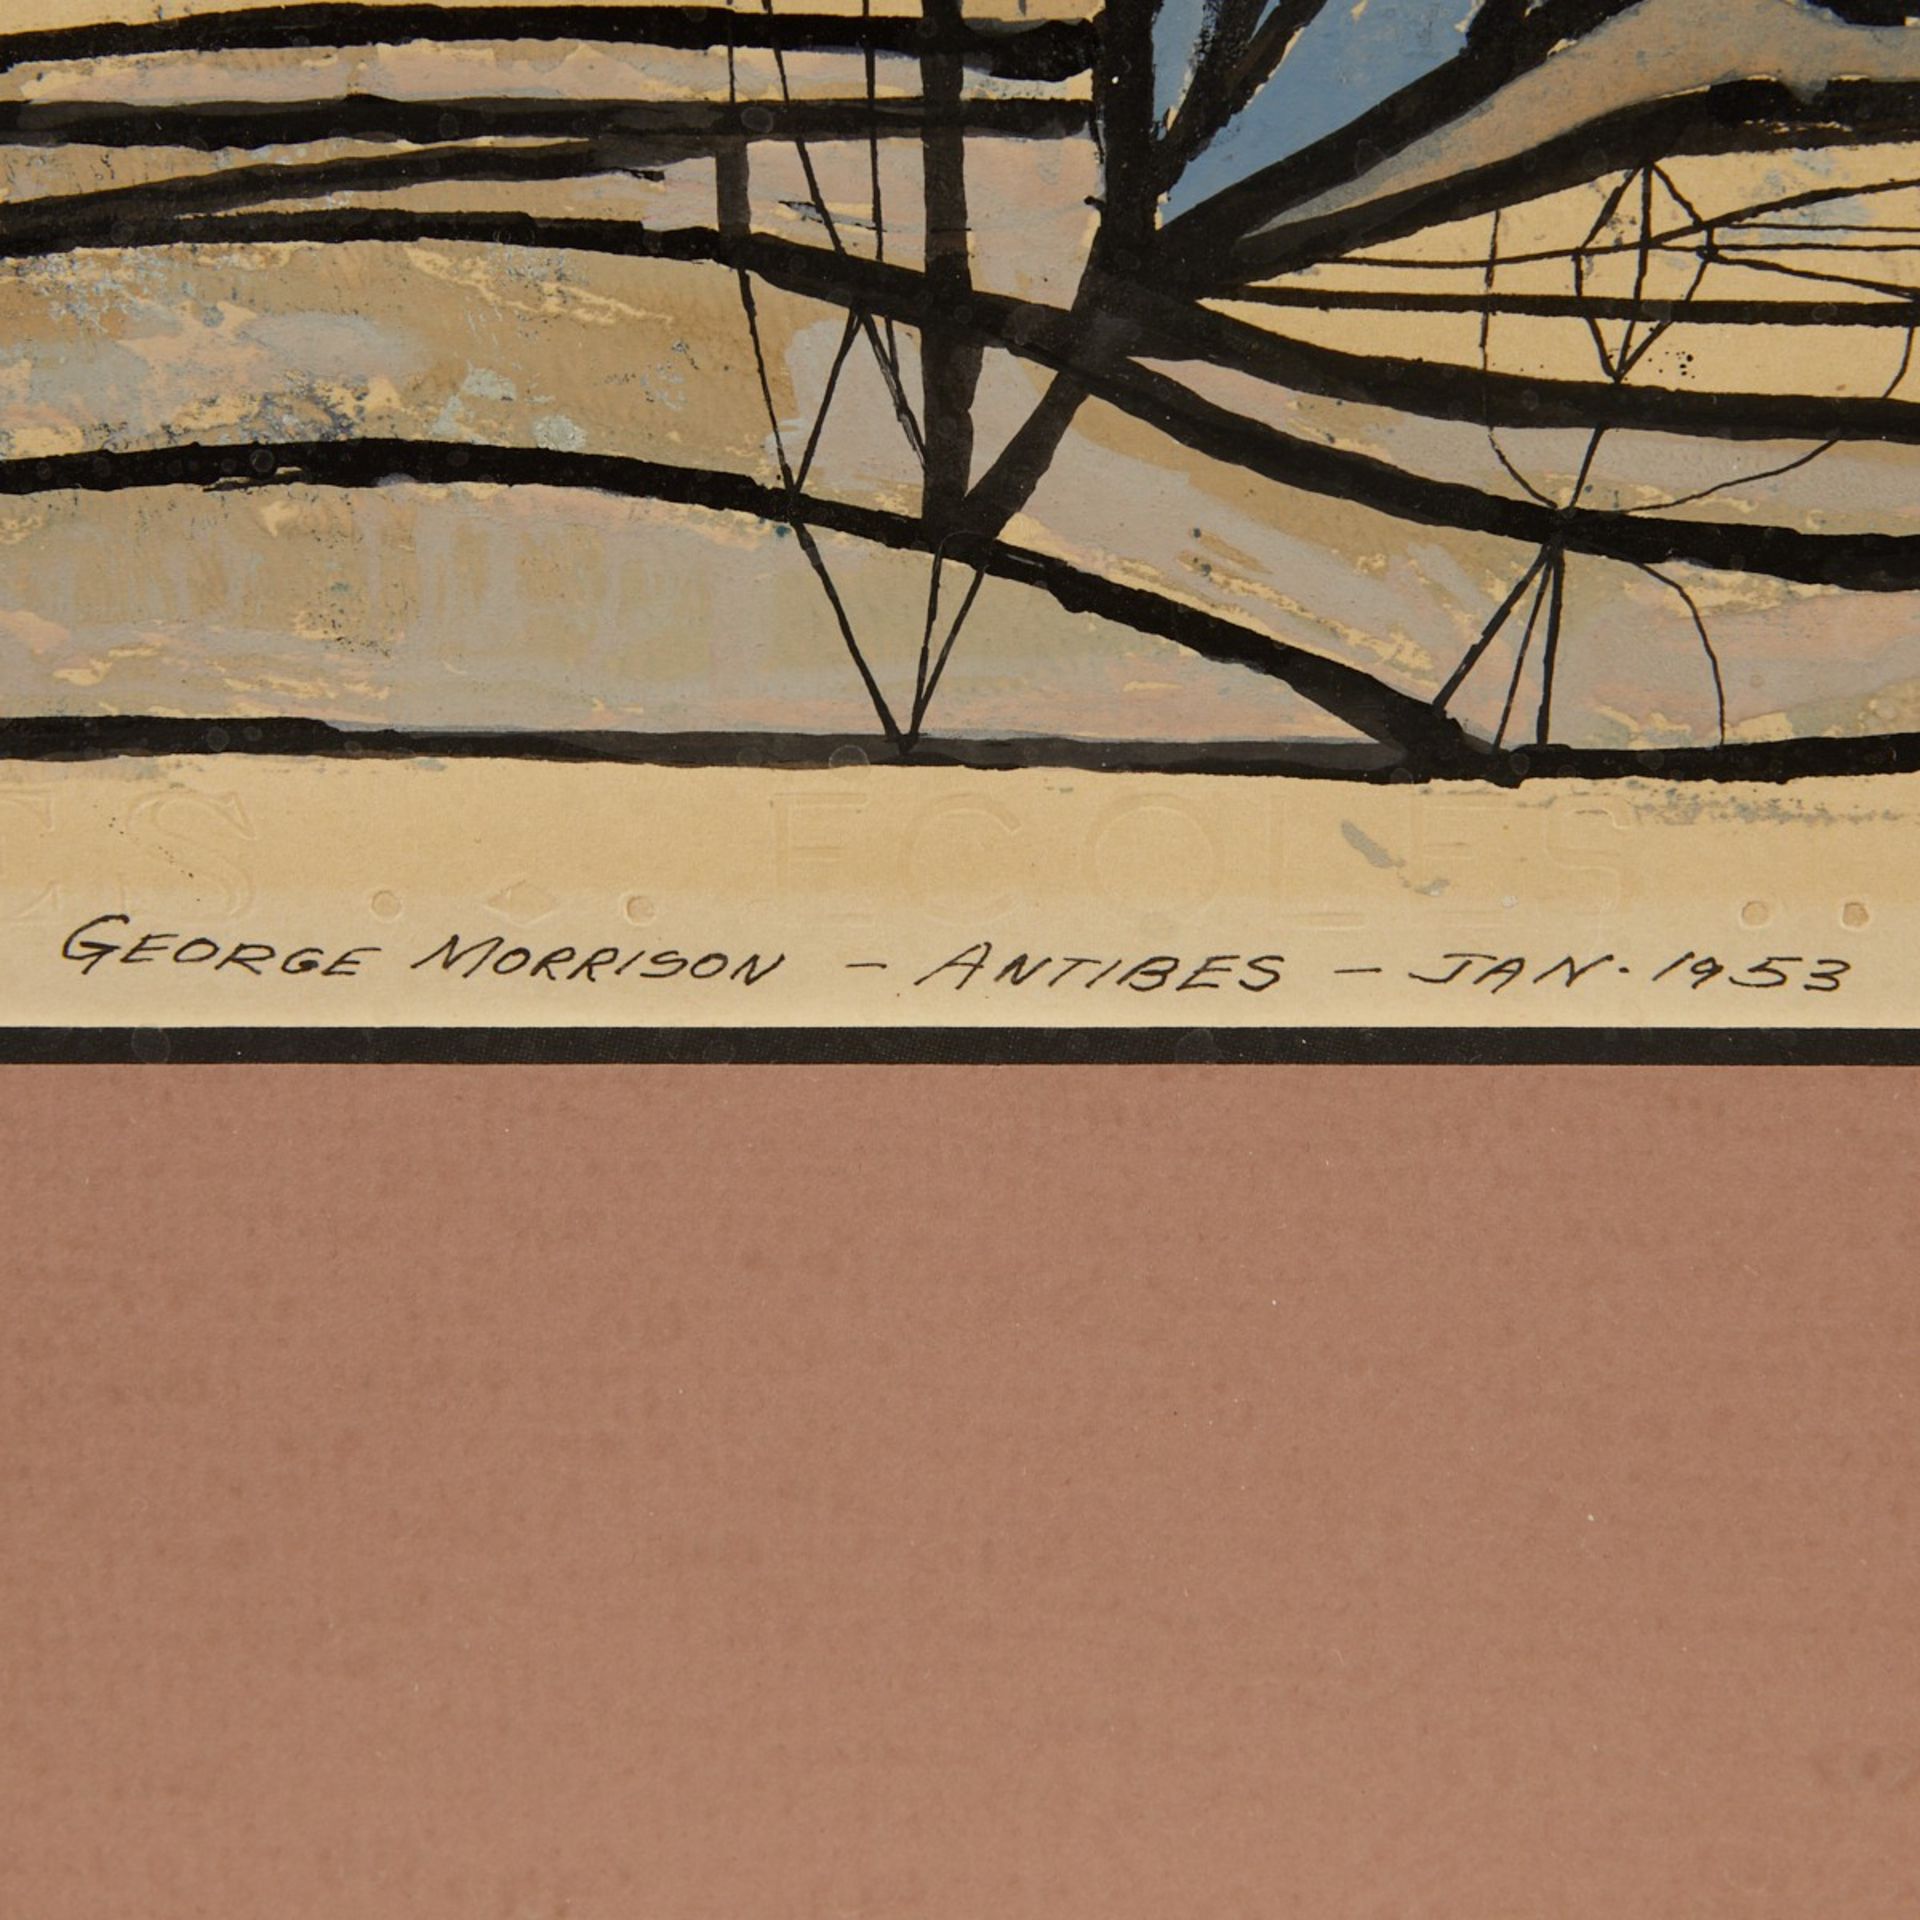 George Morrison "Arterial Structure" Painting - Image 4 of 8